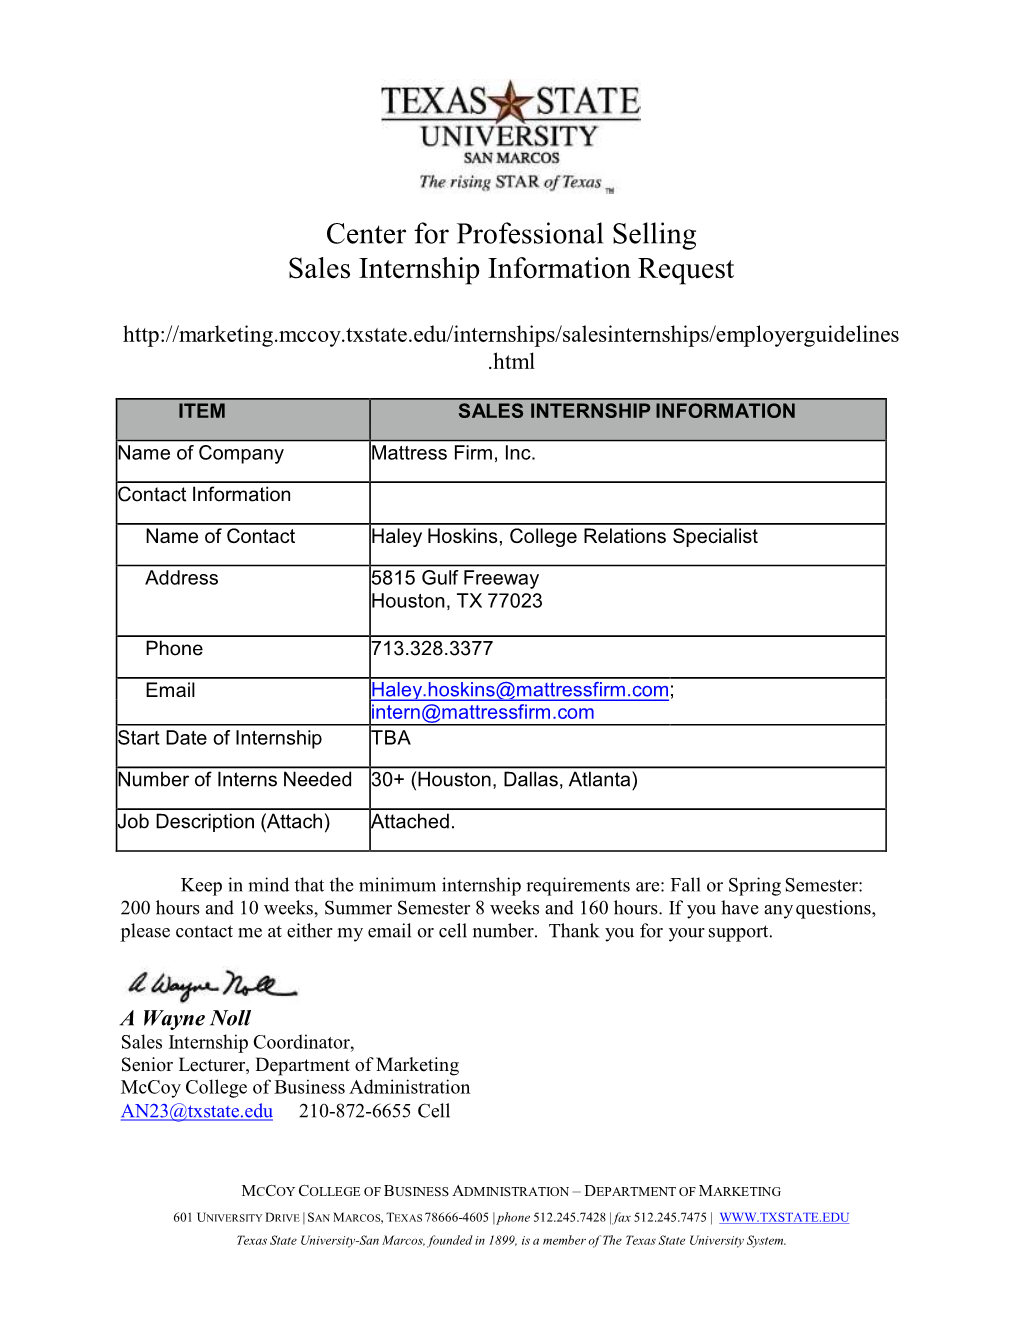 Center for Professional Selling Sales Internship Information Request